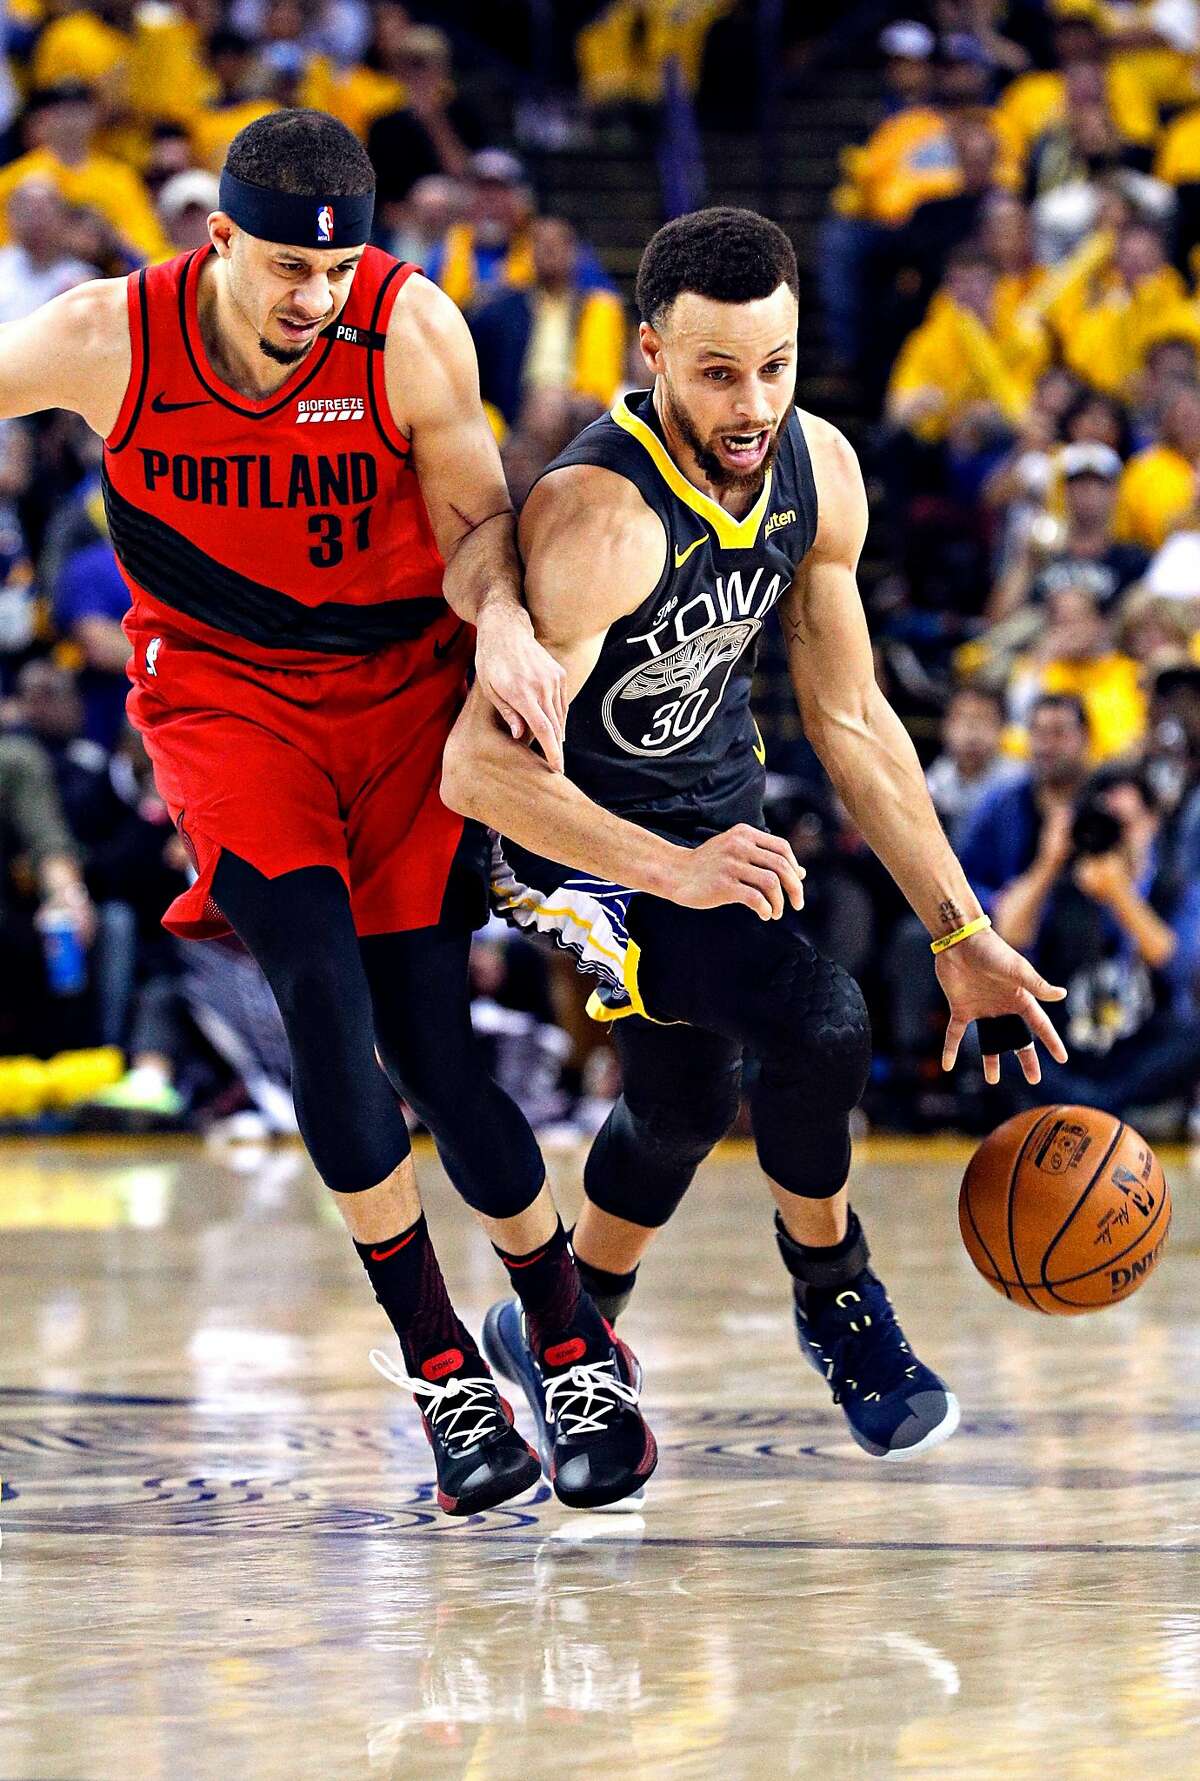 Golden State Warriors’ Stephen Curry tries to get past Portland Trail Blazers’ Seth Curry in the fourth quarter during game 2 of the Western Conference Finals between the Golden State Warriors and the Portland Trail Blazers at Oracle Arena on Thursday, May 16, 2019 in Oakland, Calif.